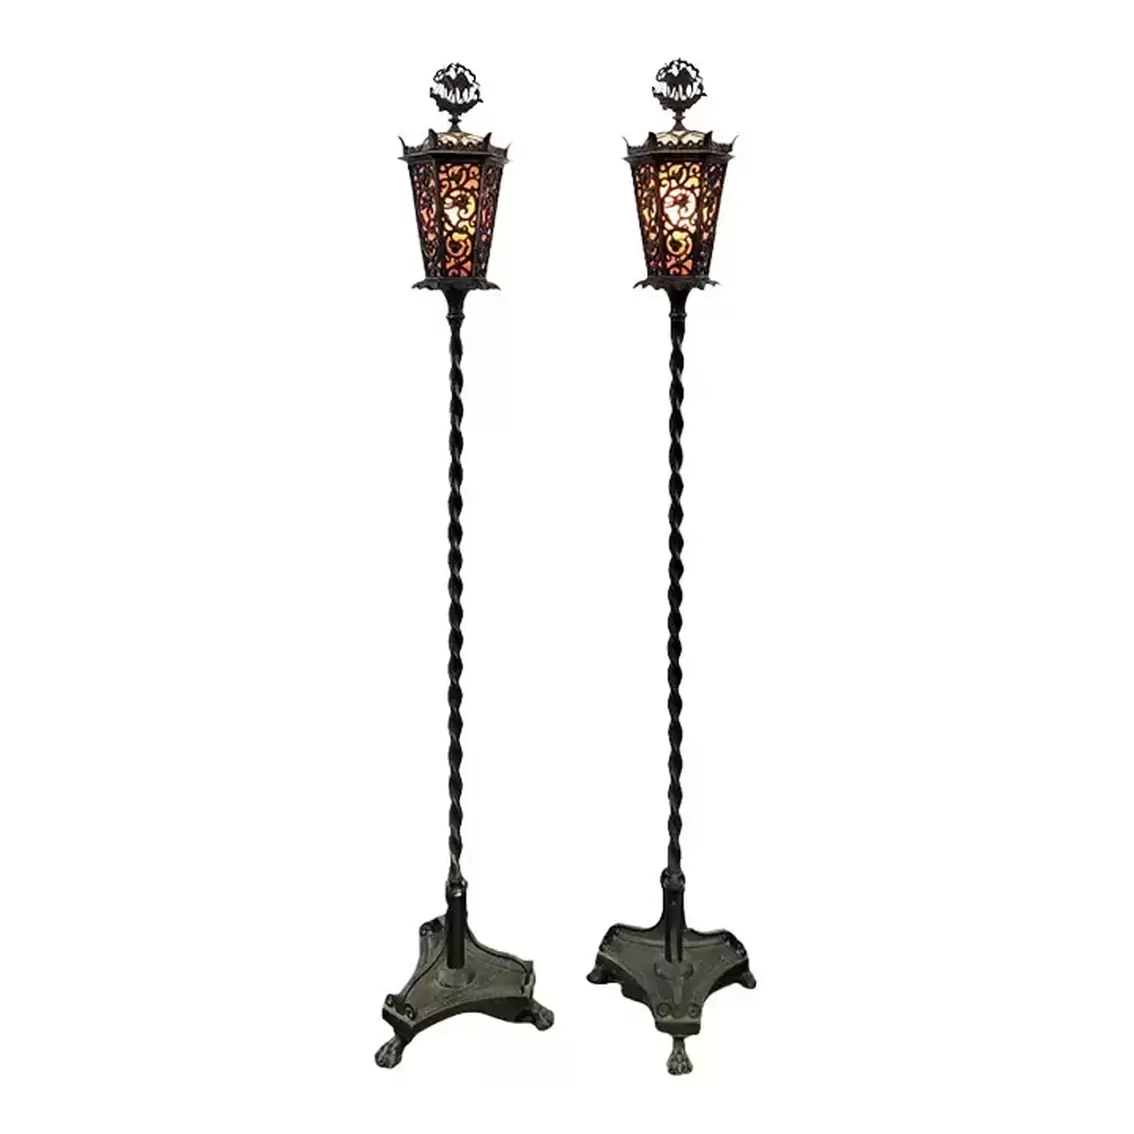 Oscar B. Bach signed torchère pair in the Henry Tudor style with Cymru/Wales dragon incorporated into the arabesque design of the lanterns.  The finials are in the image of a Tudor galleon. The tops hinge open for access to the light bulbs. The lanterns are lined with amber toned mica inserts.  The sugar barley twist poles surmount triform bases supported by paw feet.  The lights turn on by pull-chain.  The floor lamps were a 1922 release design and hand-wrought in lead and bronze in Oscar Bach's New York studio.